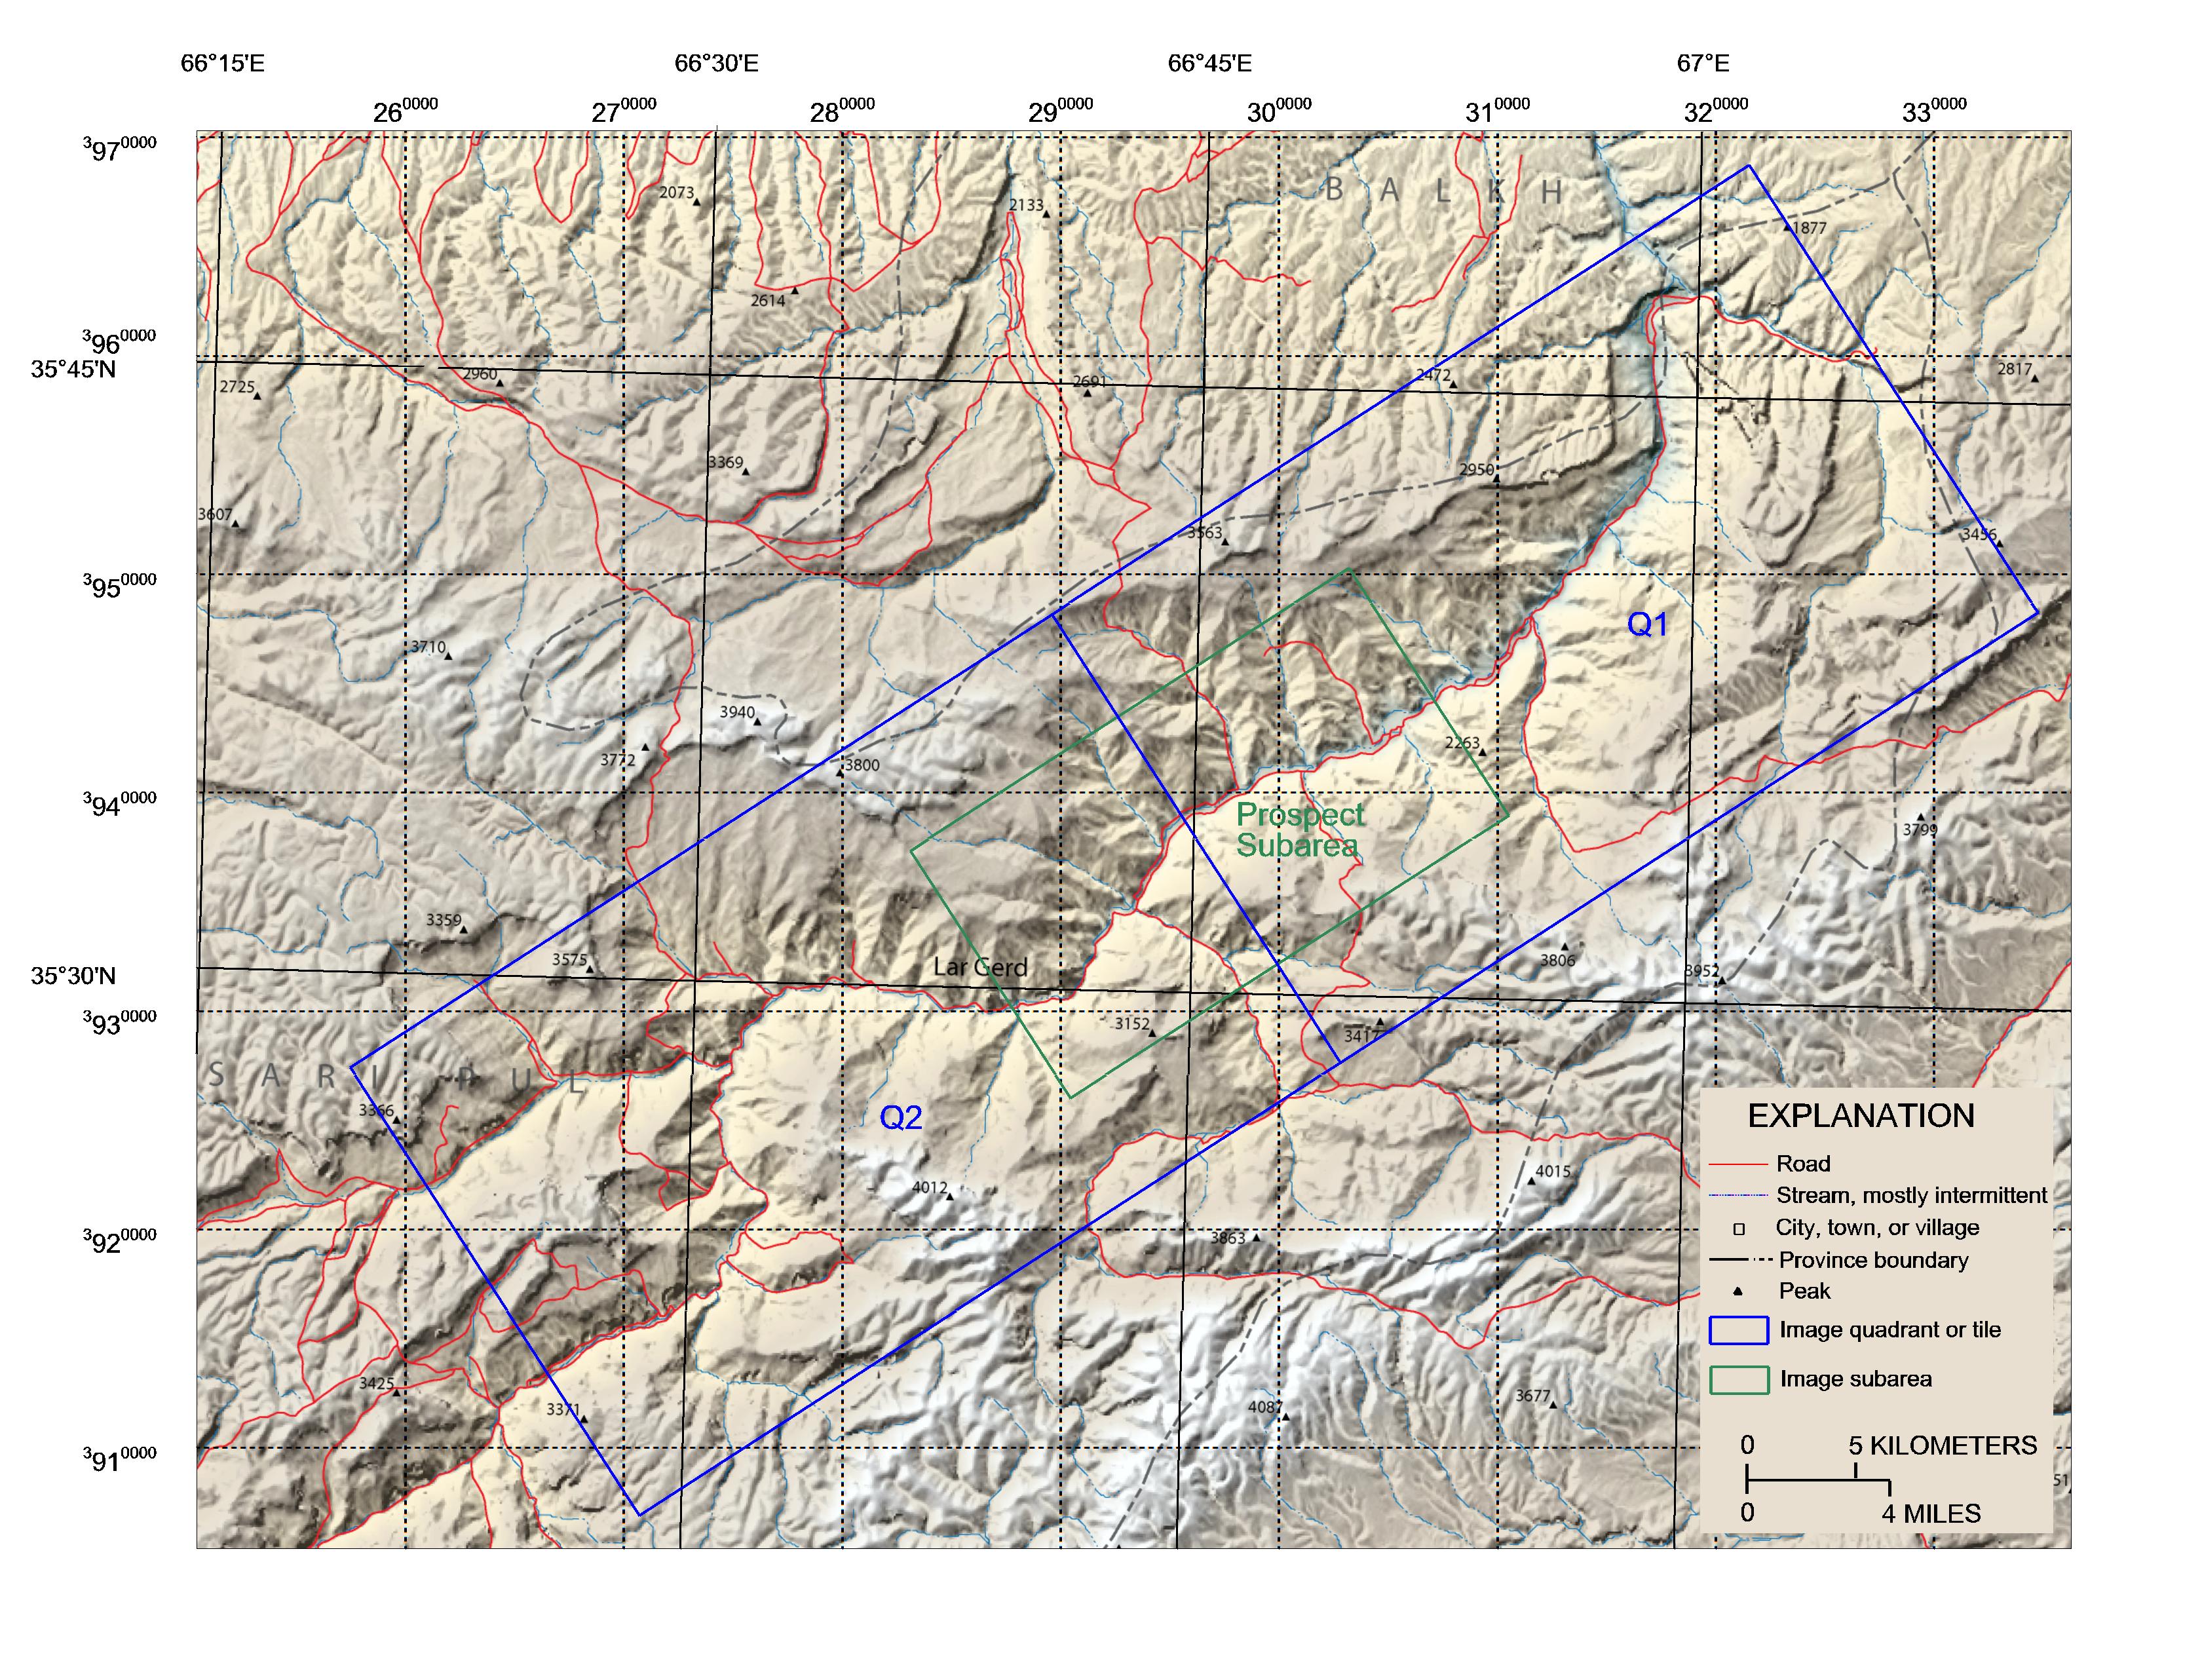 Thumbnail of and link to map PDF (1.2 MB)